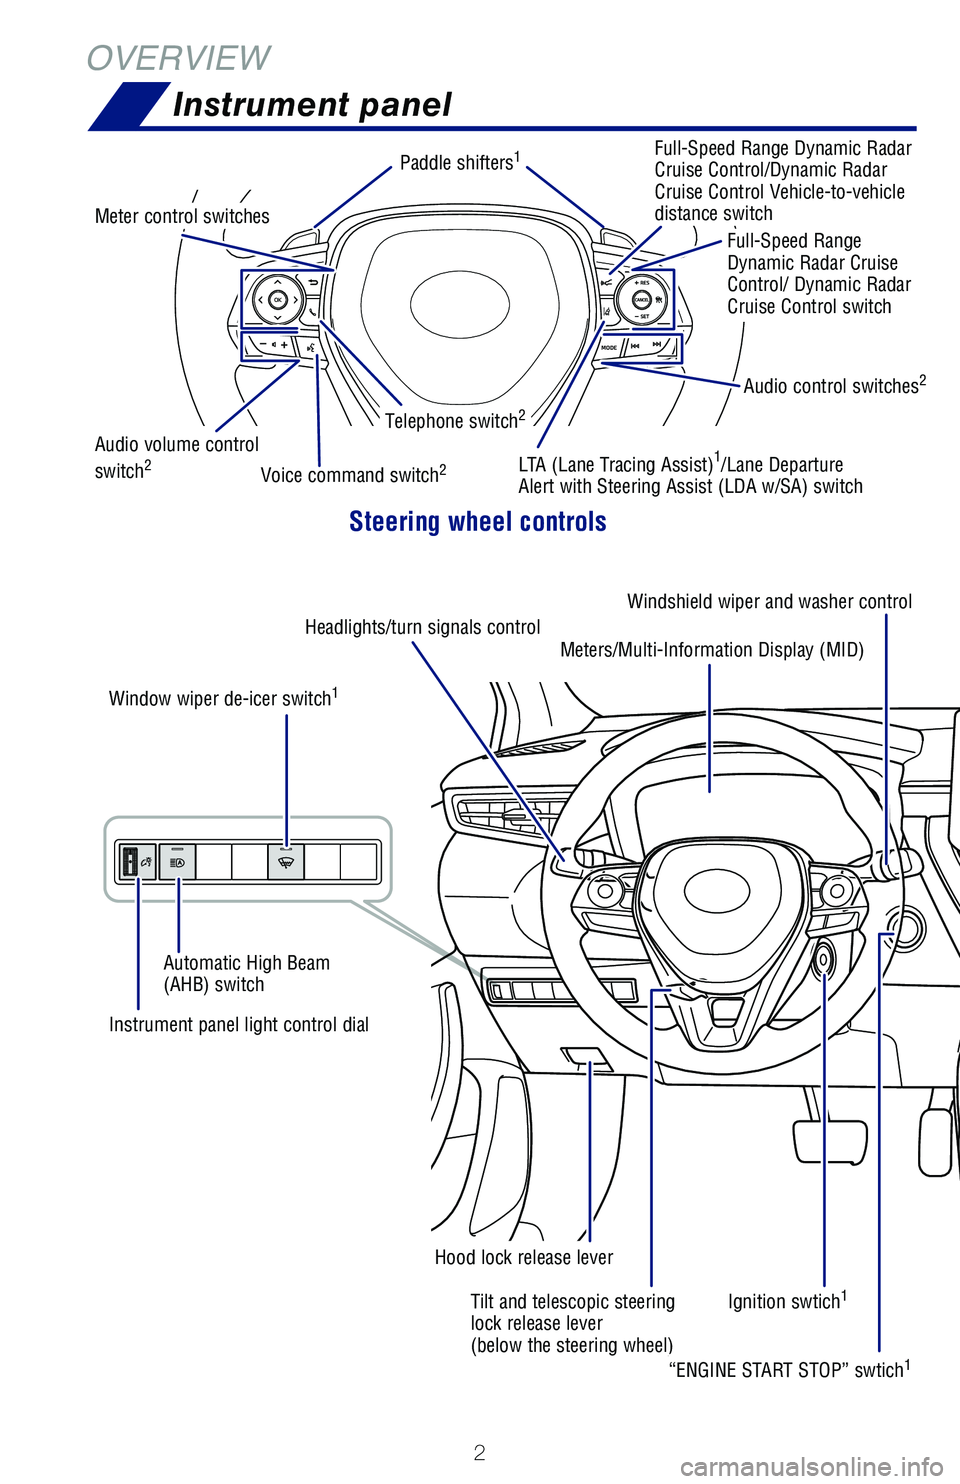 TOYOTA COROLLA 2020  Owners Manual (in English) 2
OVERVIEWInstrument panel
Windshield wiper and washer control
Tilt and telescopic steering 
lock release lever 
(below the steering wheel)
Instrument panel light control dial
“ENGINE START STOP” 